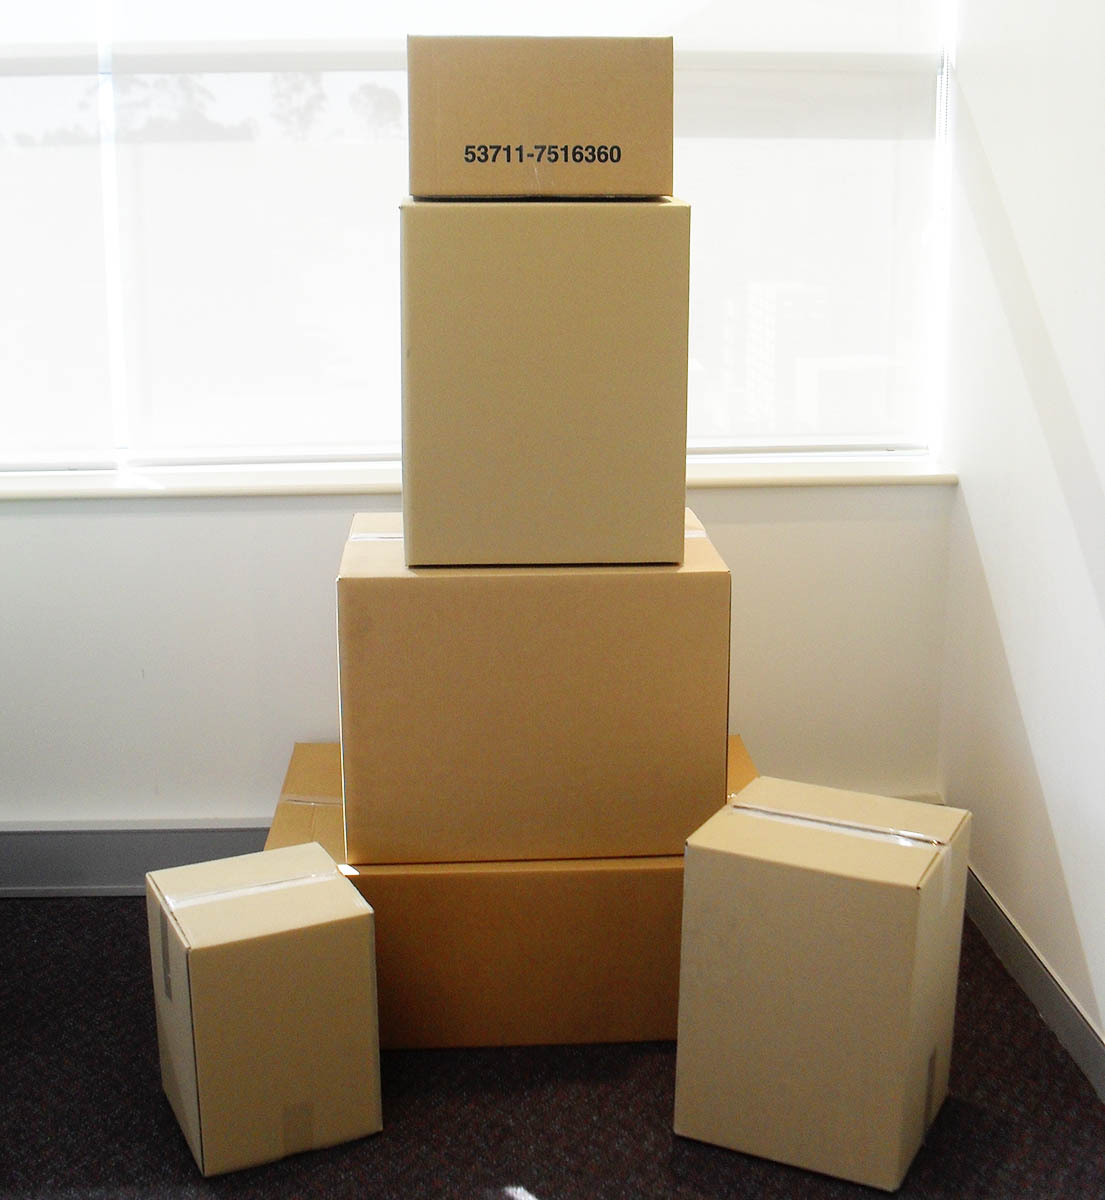 About Standard Cardboard Boxes - UBEECO Packaging Solutions